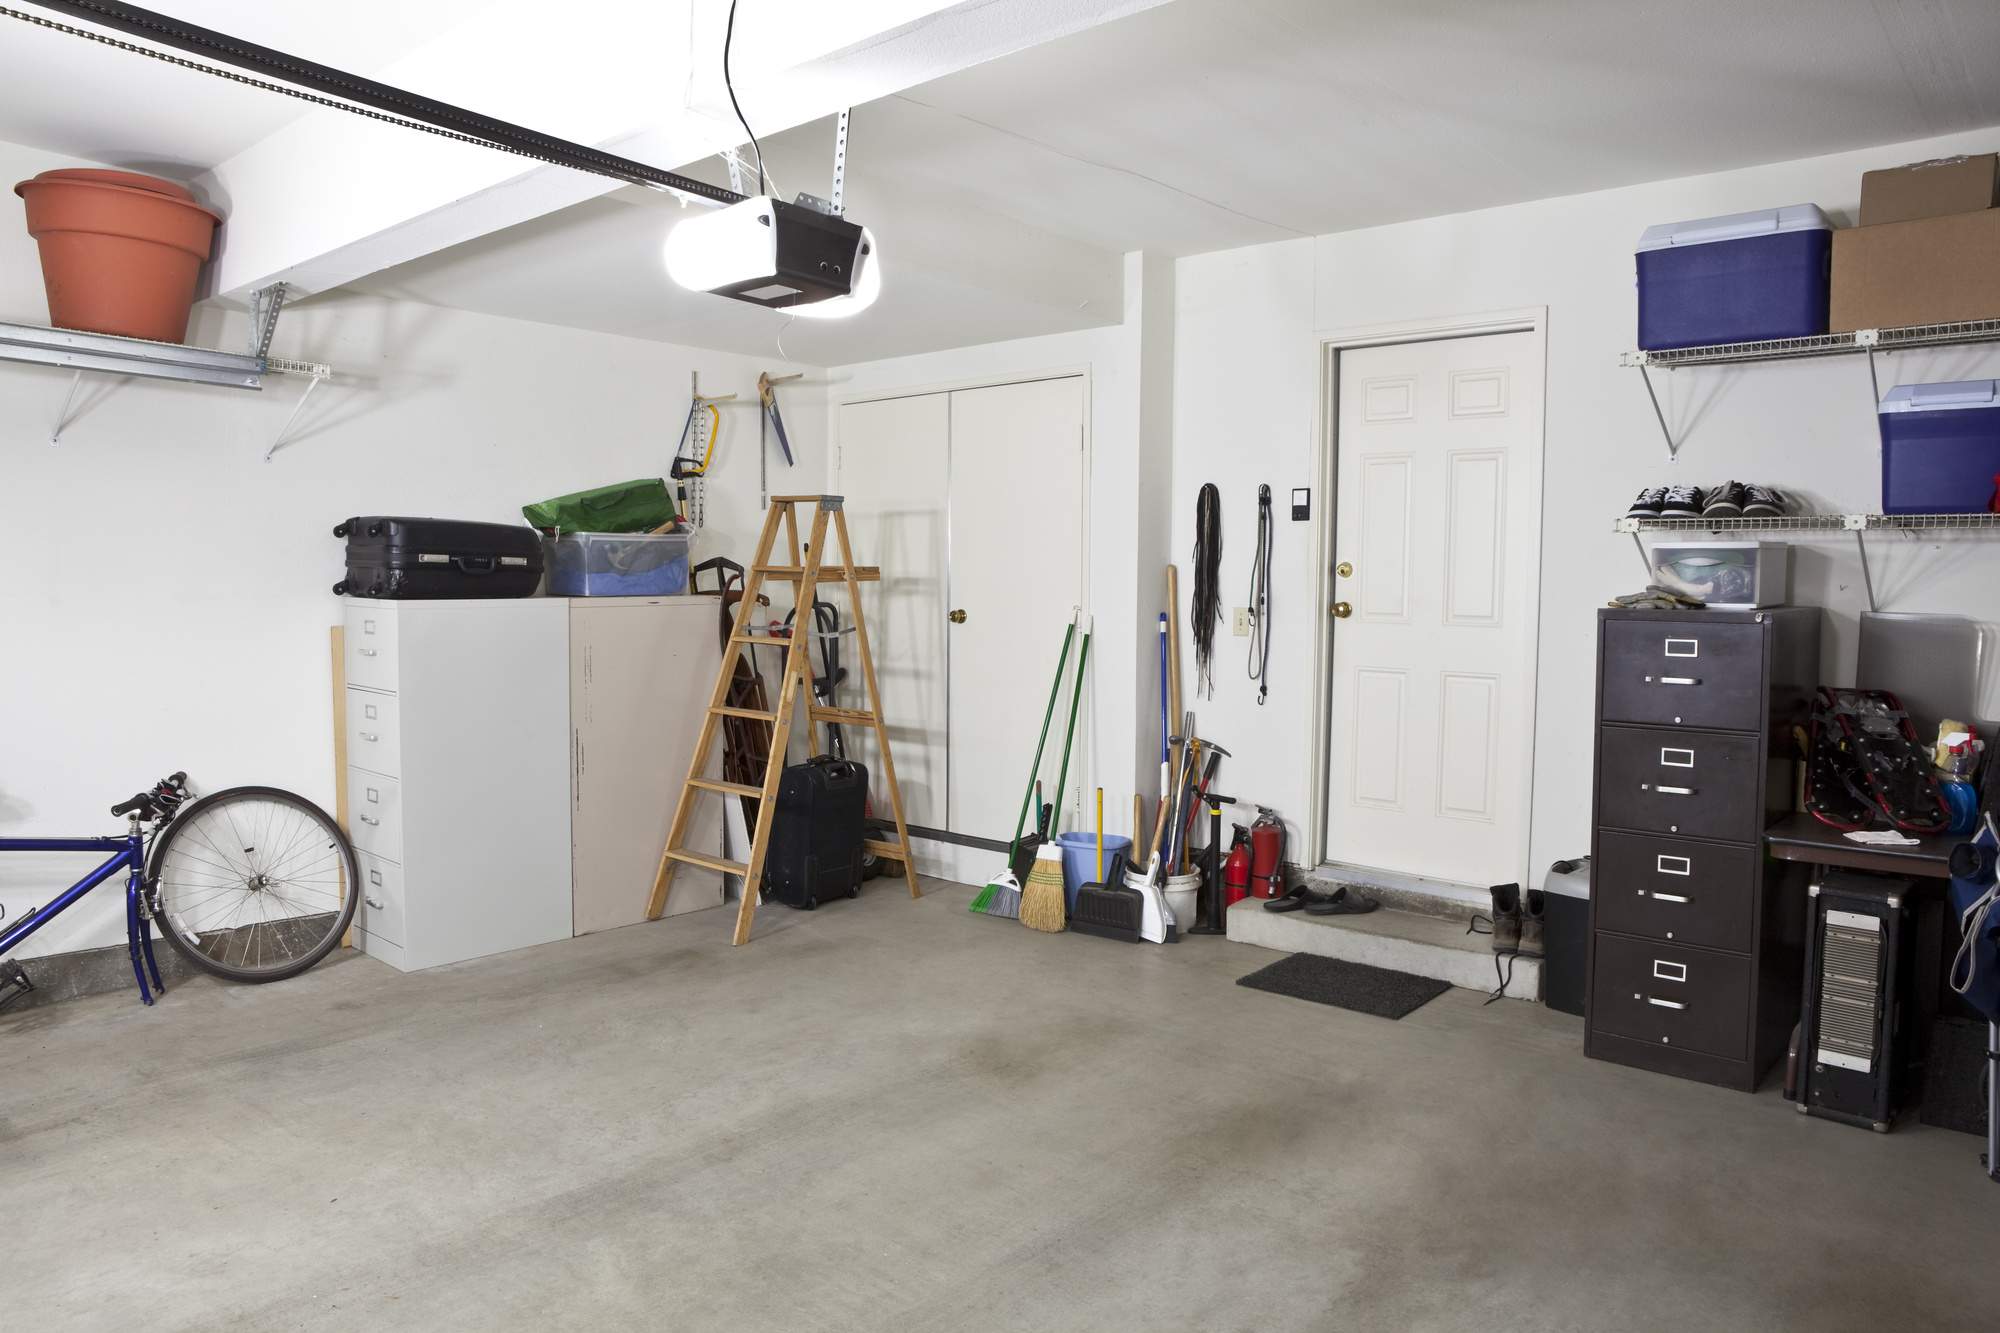 3 Common Garage Remodeling Mistakes and How to Avoid Them